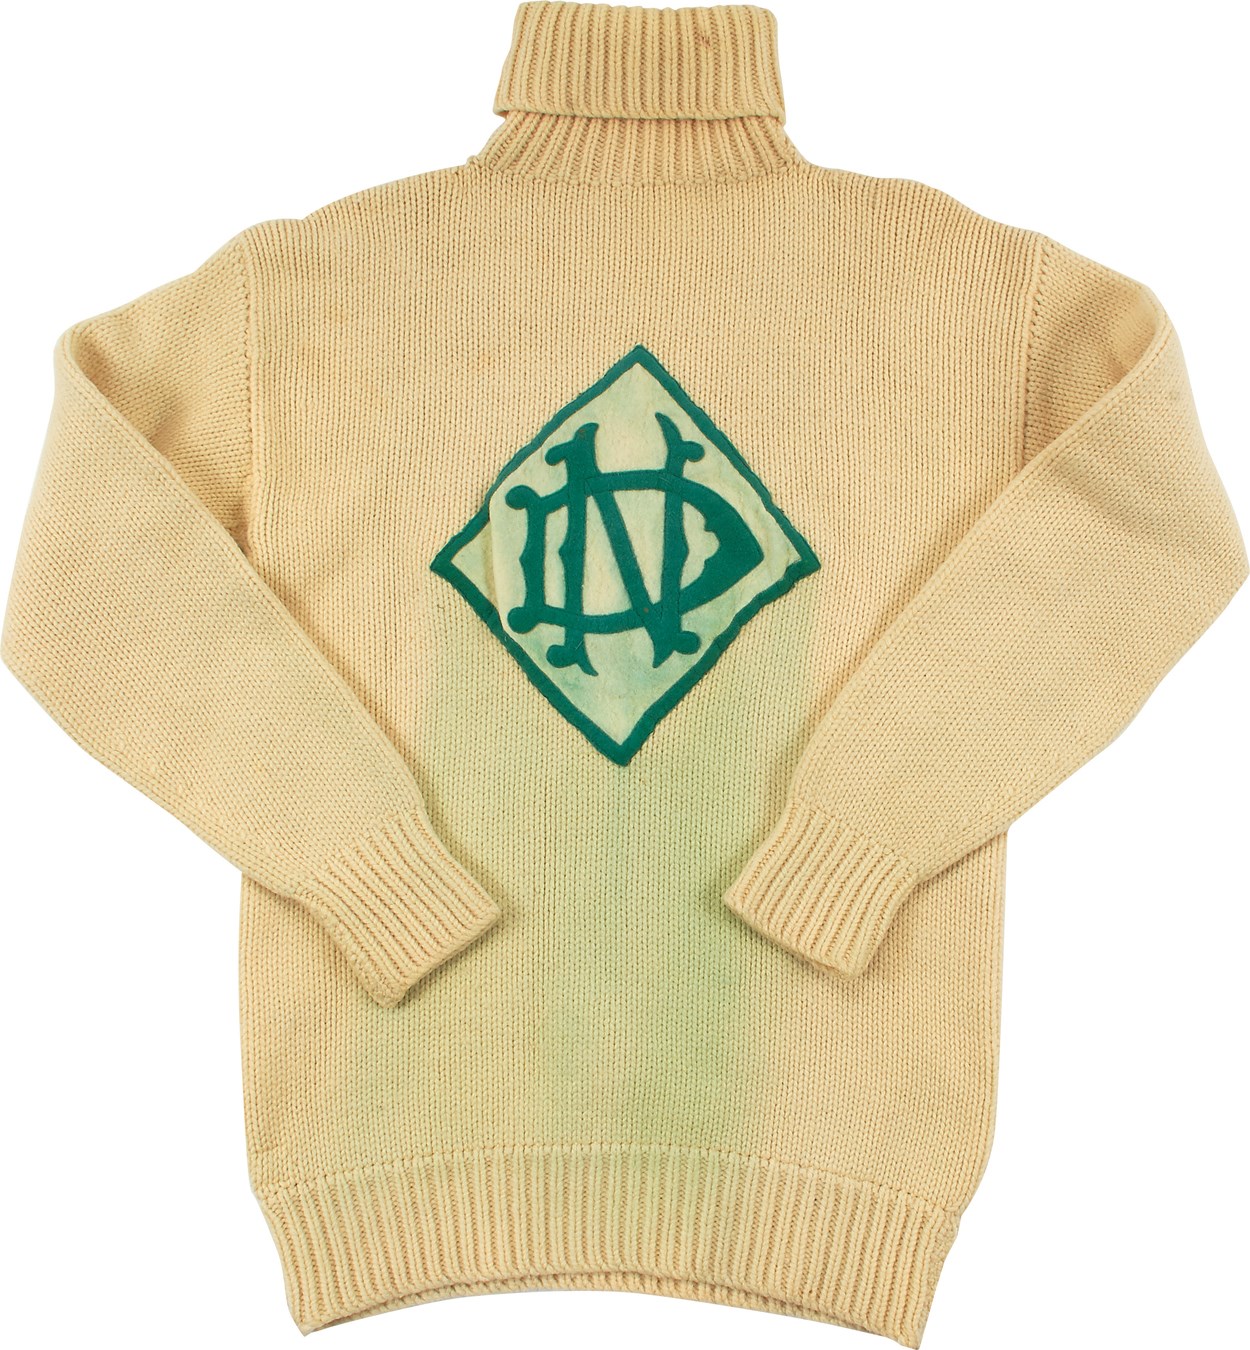 Antique Sporting Goods - Early Notre Dame Football Letterman's Sweater